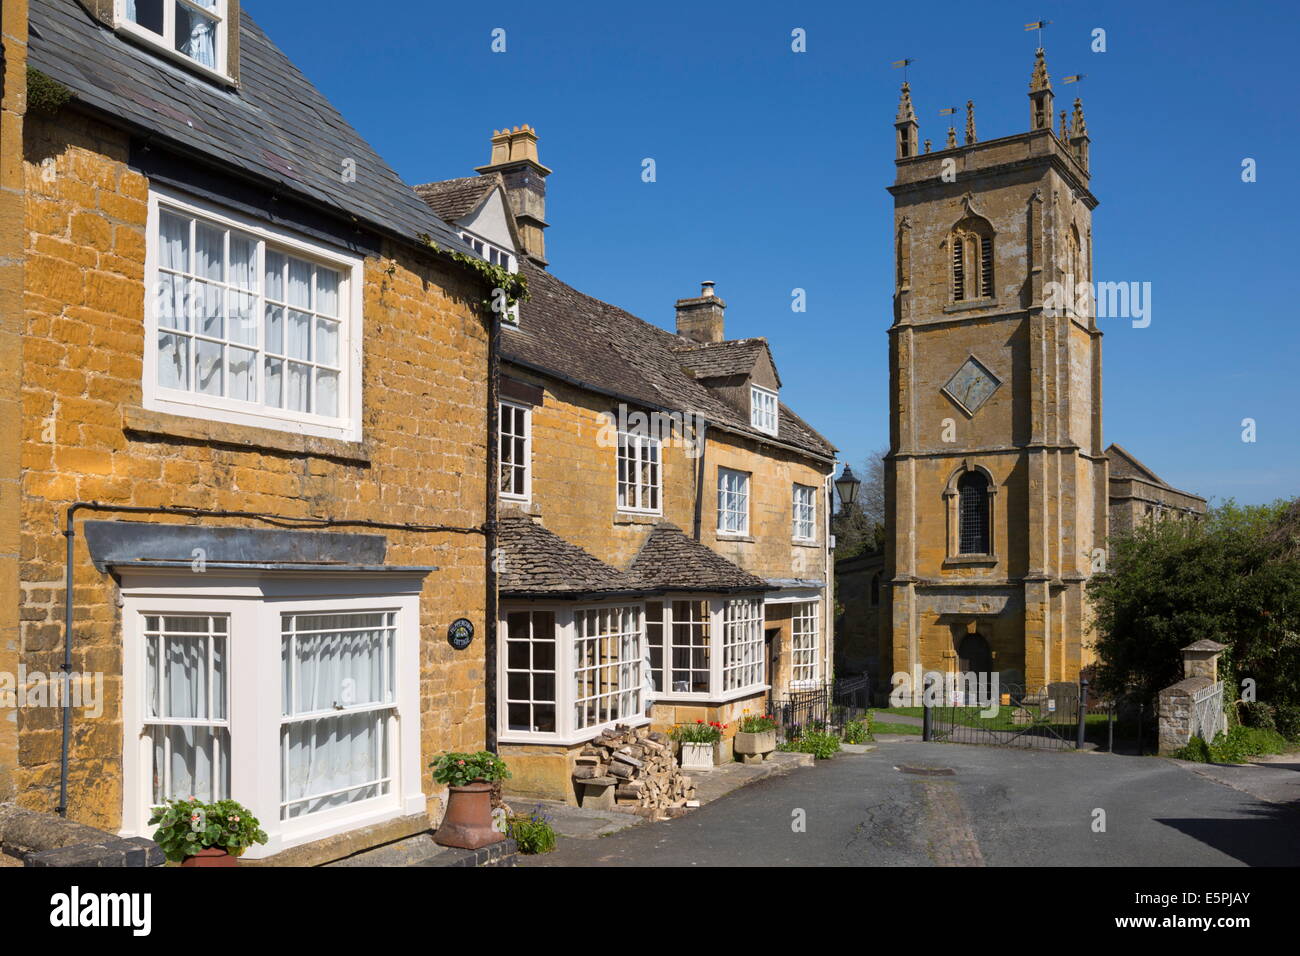 Parish church and terraced cotswold cottages, Blockley, Cotswolds, Gloucestershire, England, United Kingdom, Europe Stock Photo